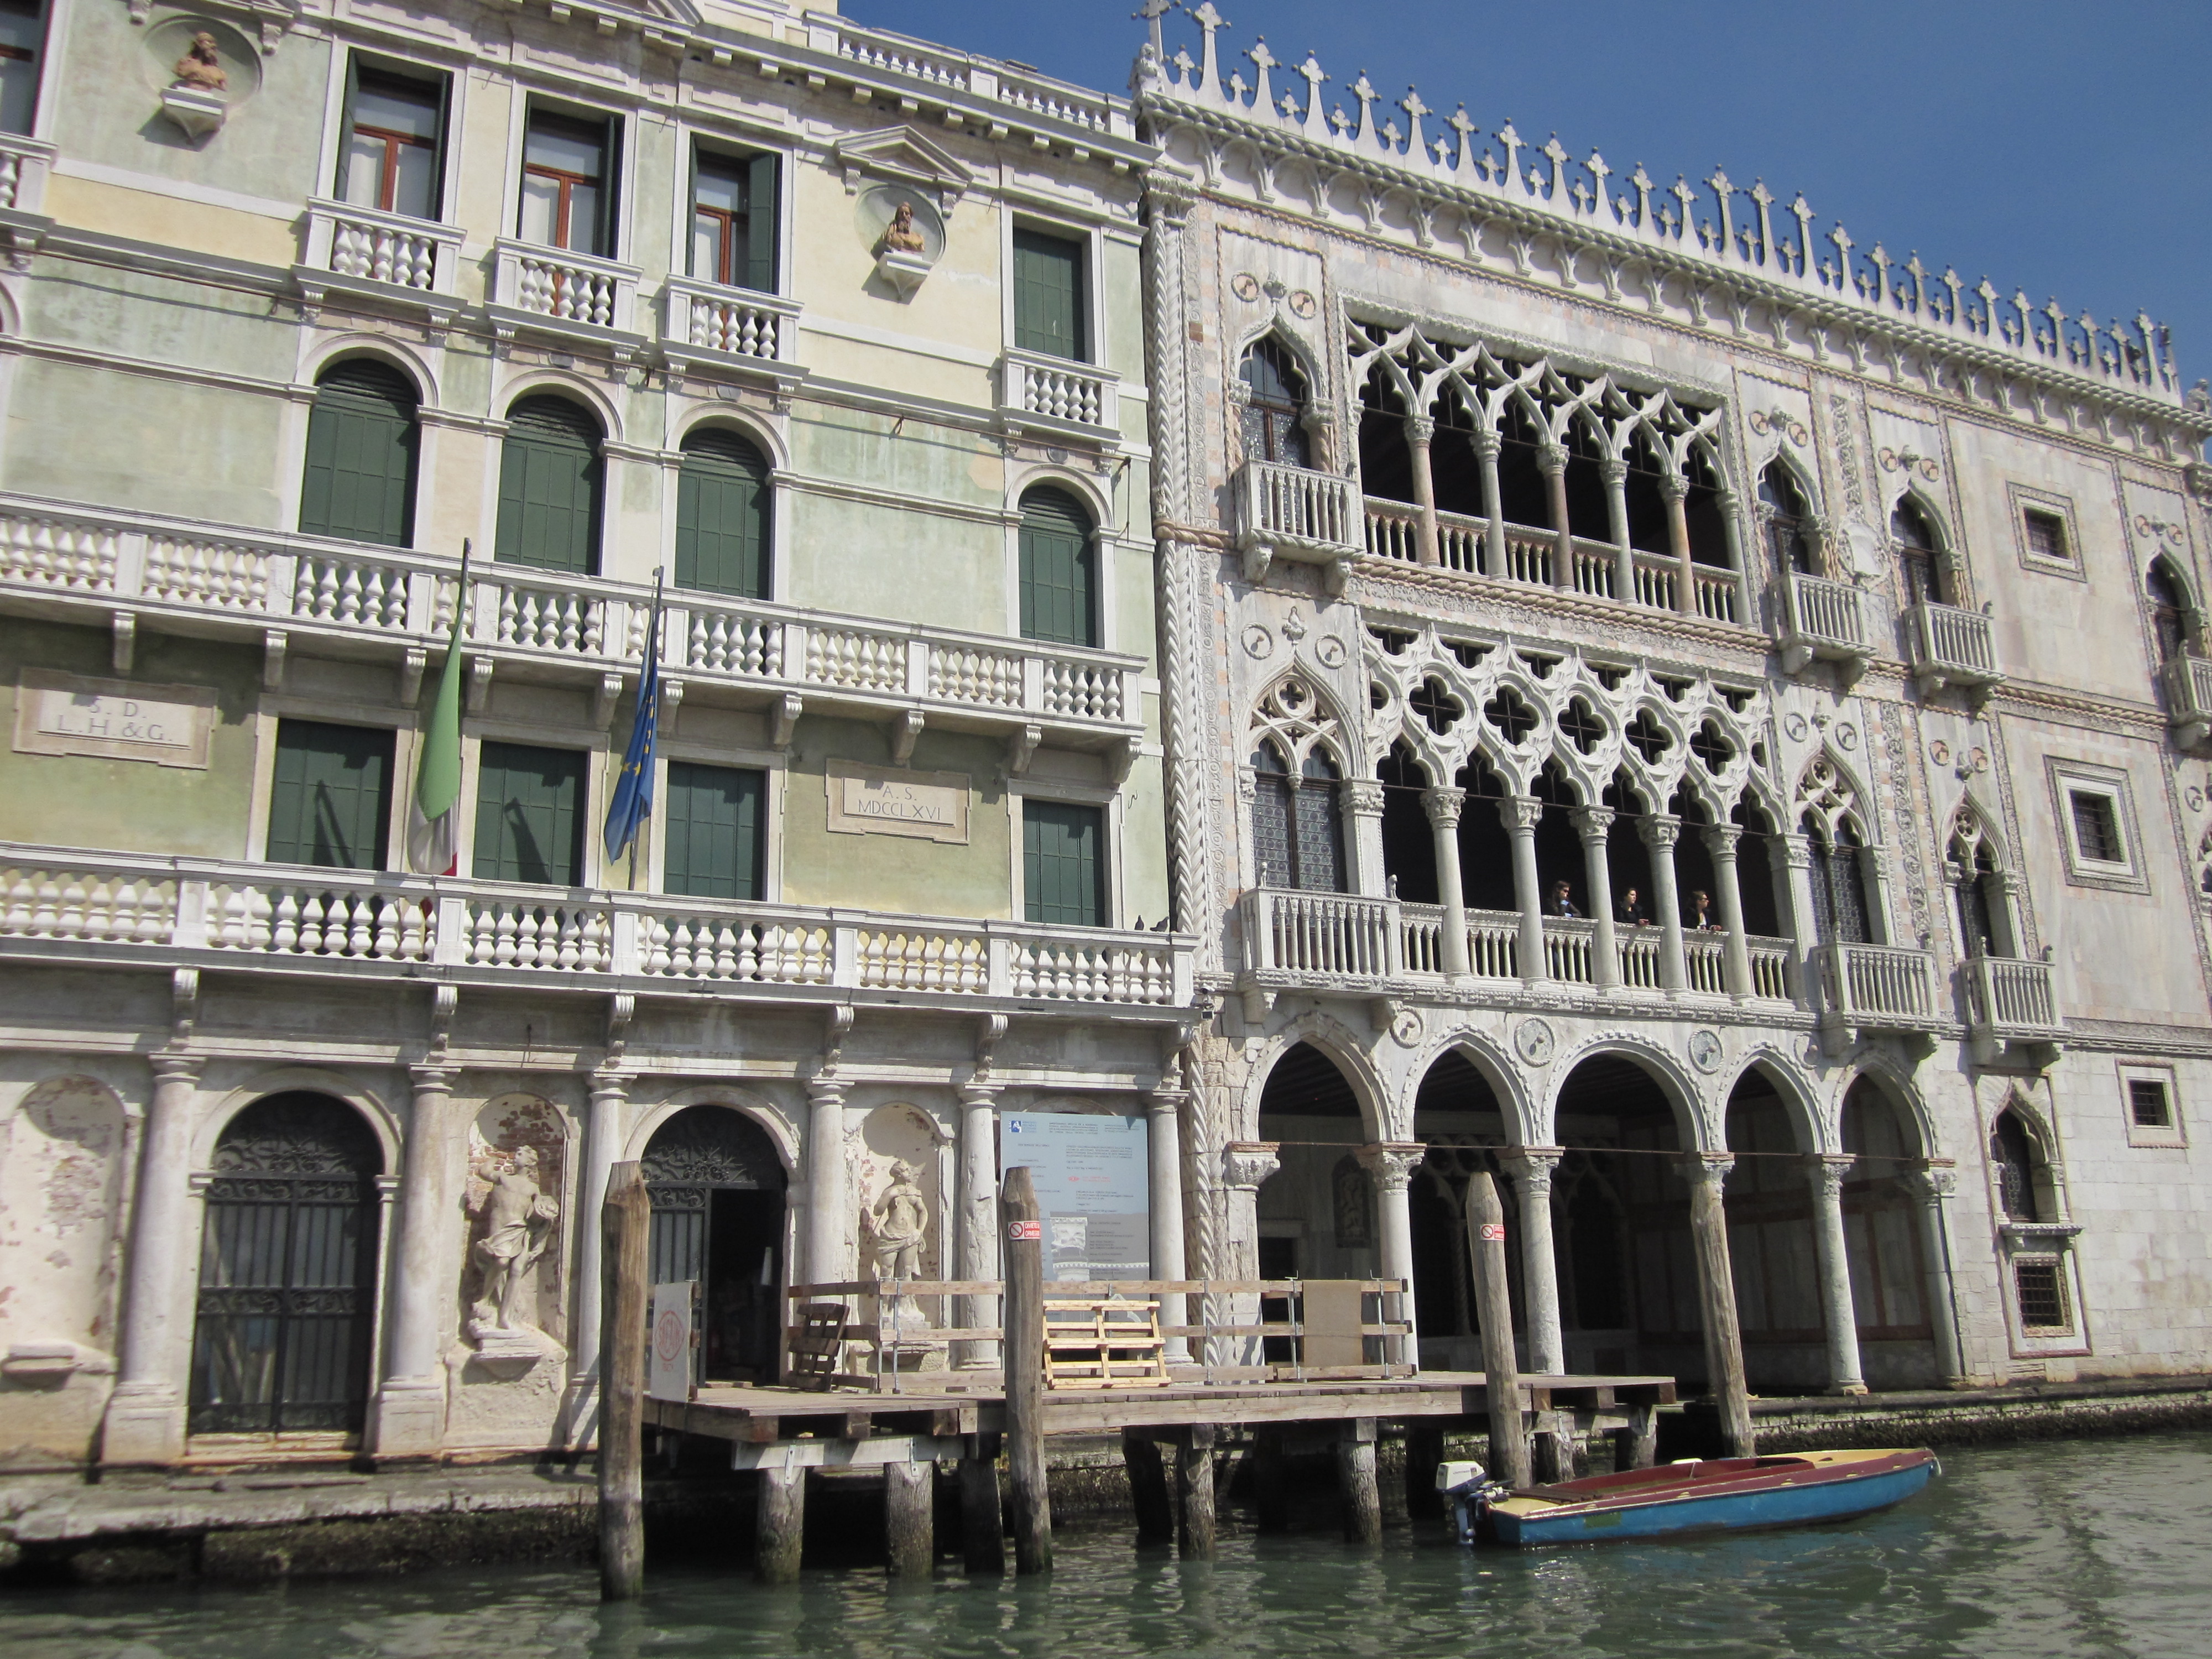 Decaying Elegance on the Grand Canal